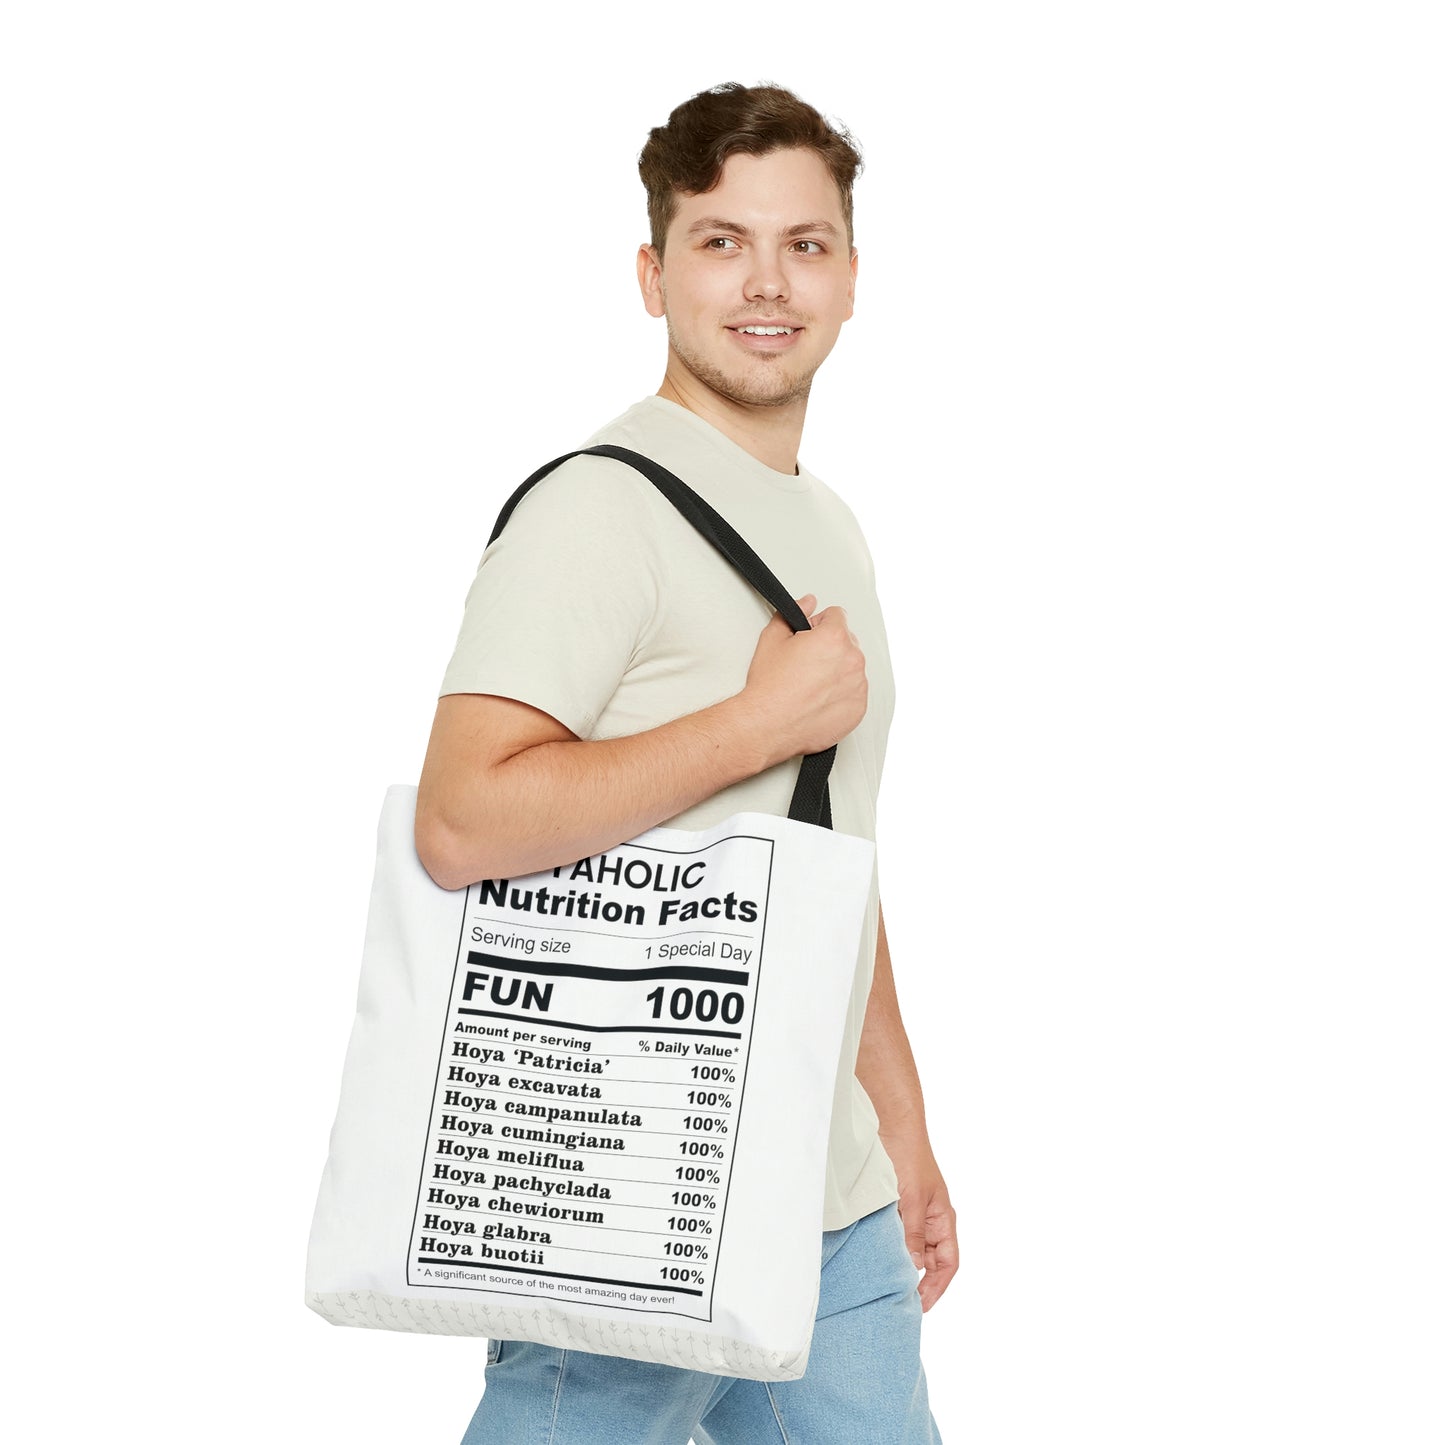 HOYAHOLIC NUTRITION FACTS TOTE BAG